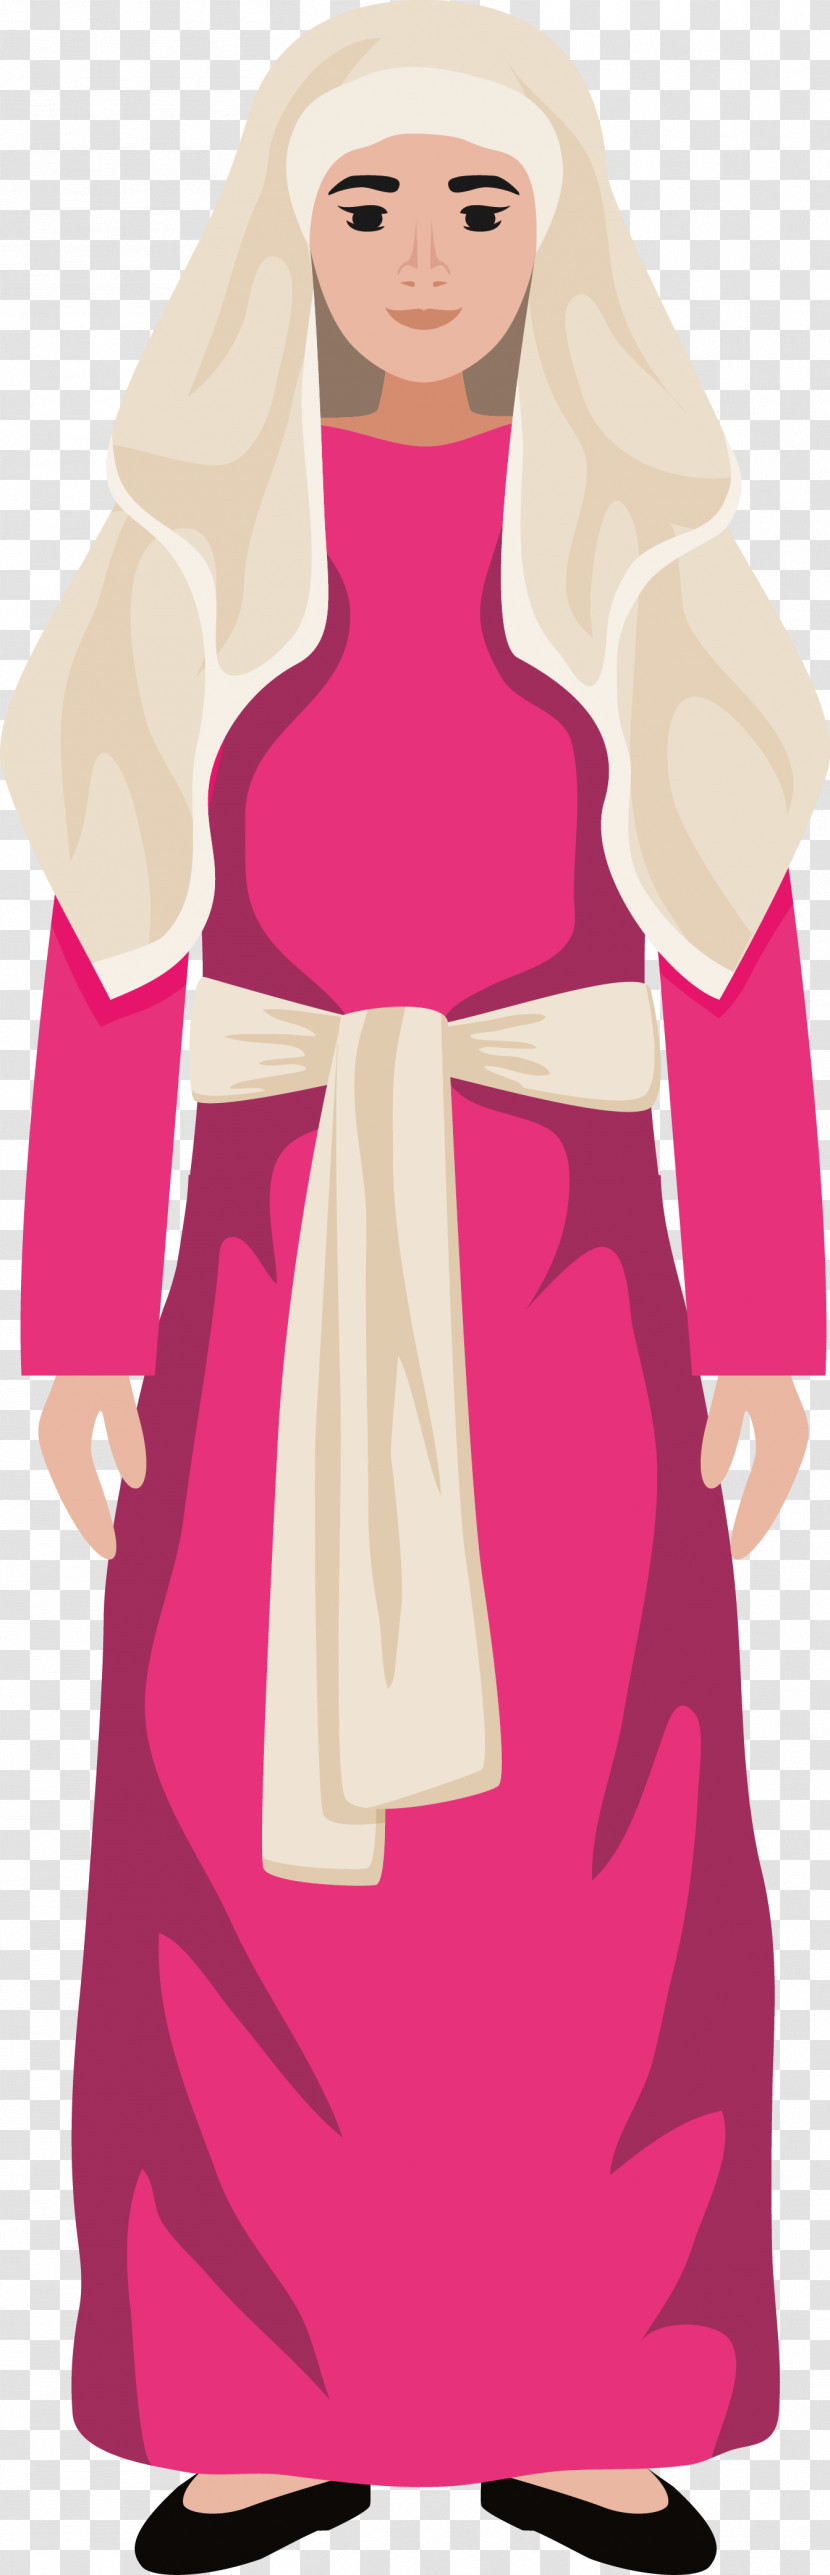 Human Hair Color Clothing Character Pink M Color Transparent PNG